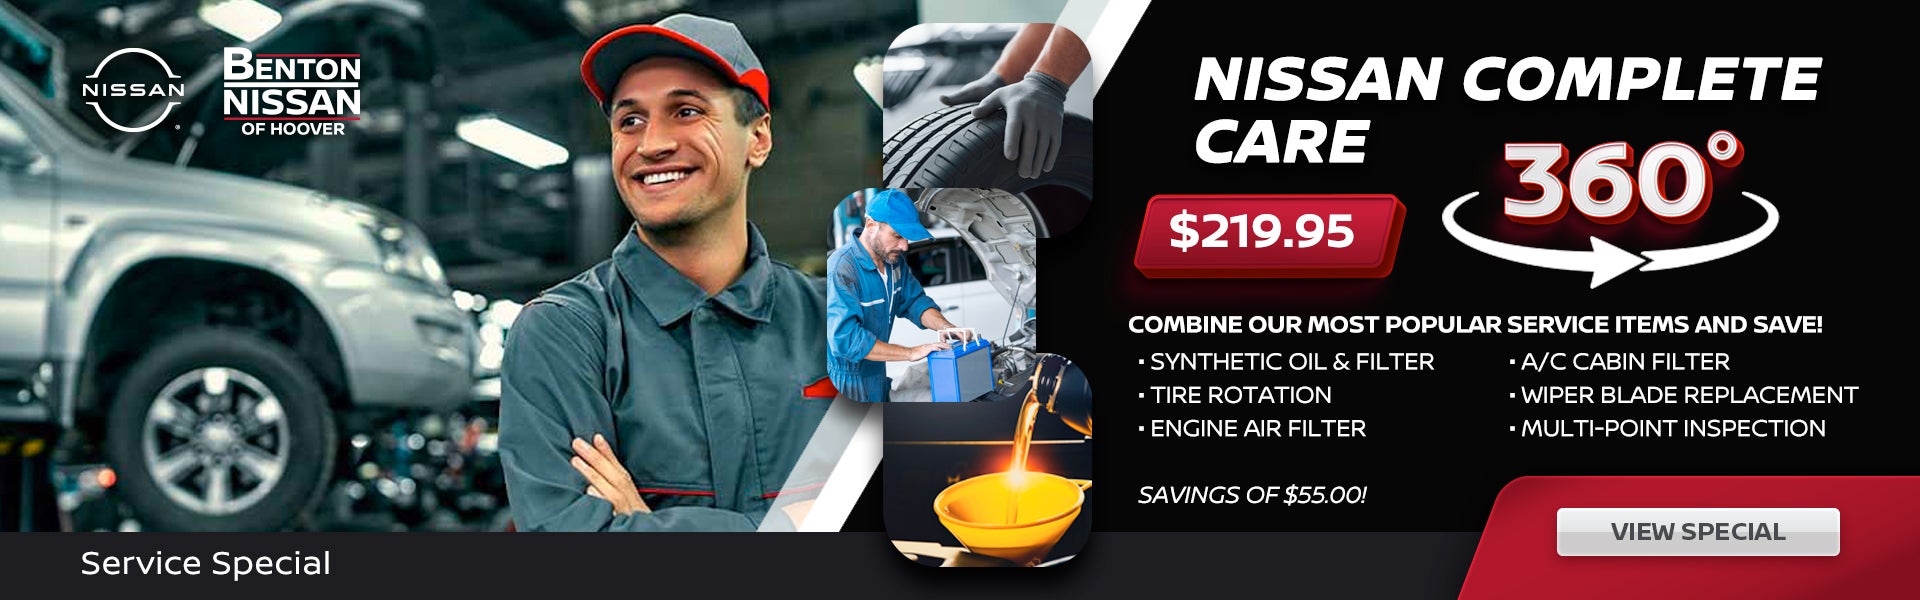 Nissan Complete Care 360 